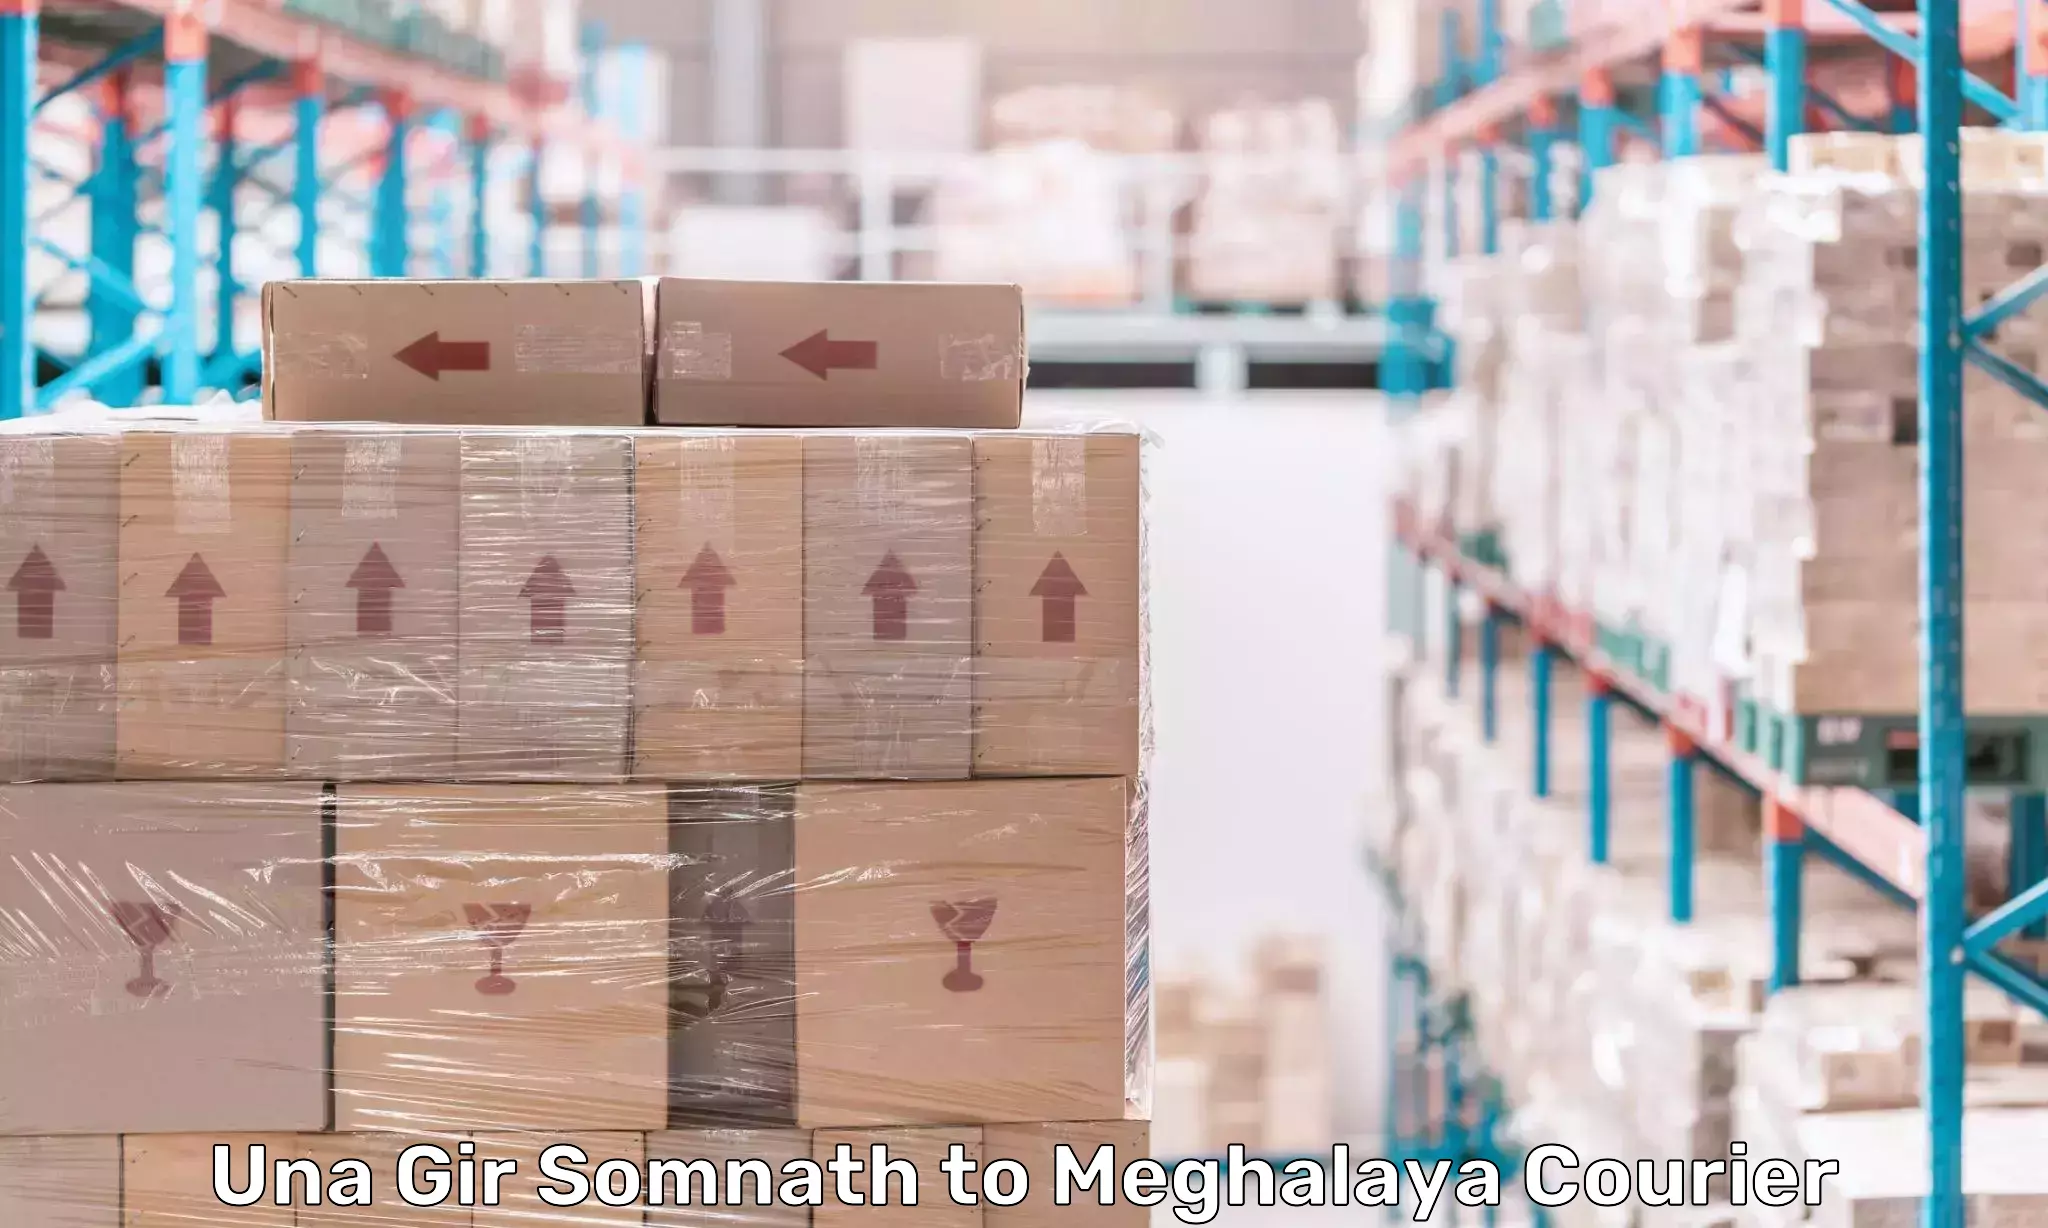 State-of-the-art courier technology Una Gir Somnath to Garobadha